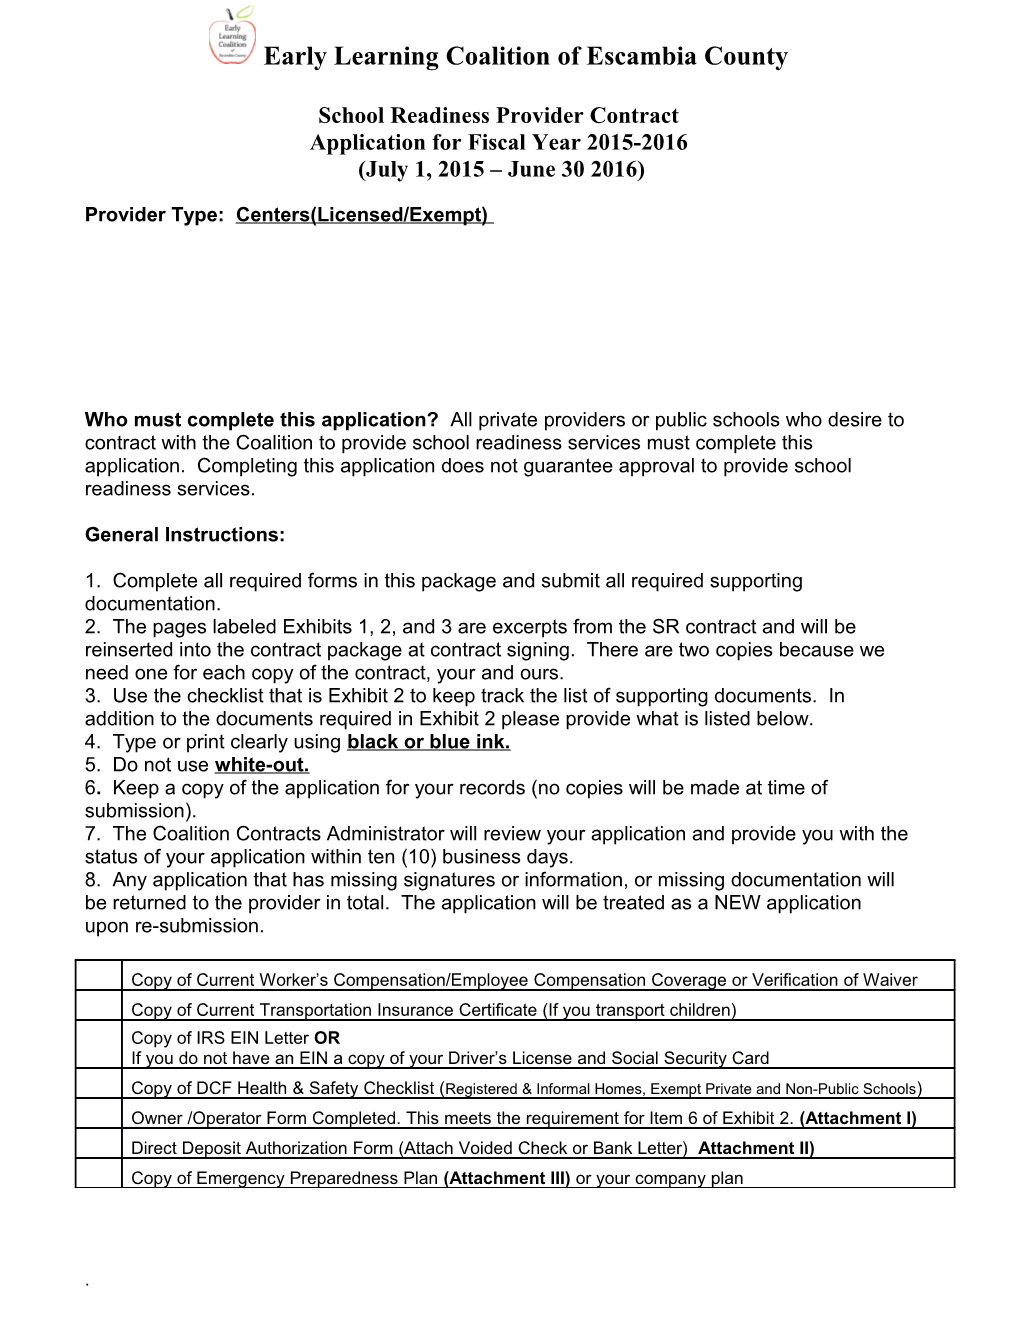 Florida Child Care Resource & Referral 2007 - 2008 Provider Update Form s1